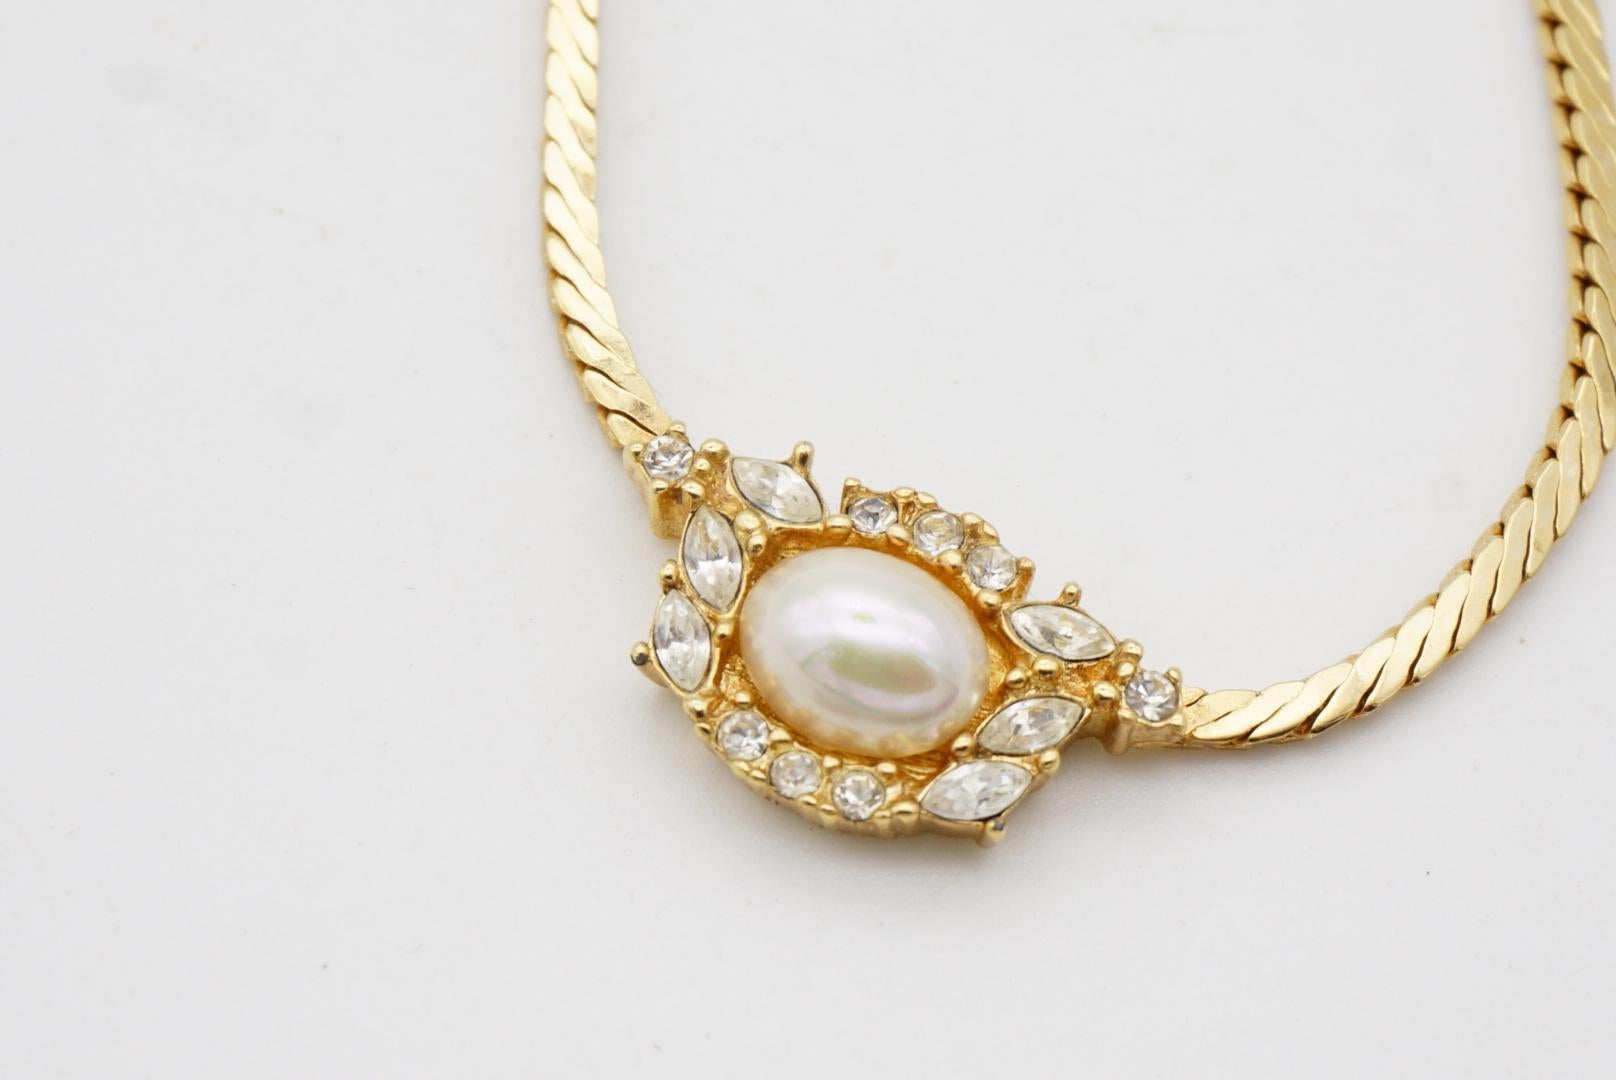 Christian Dior Vintage 1980s Oval Pearl Flower Crystals Gold Pendant Necklace For Sale 1